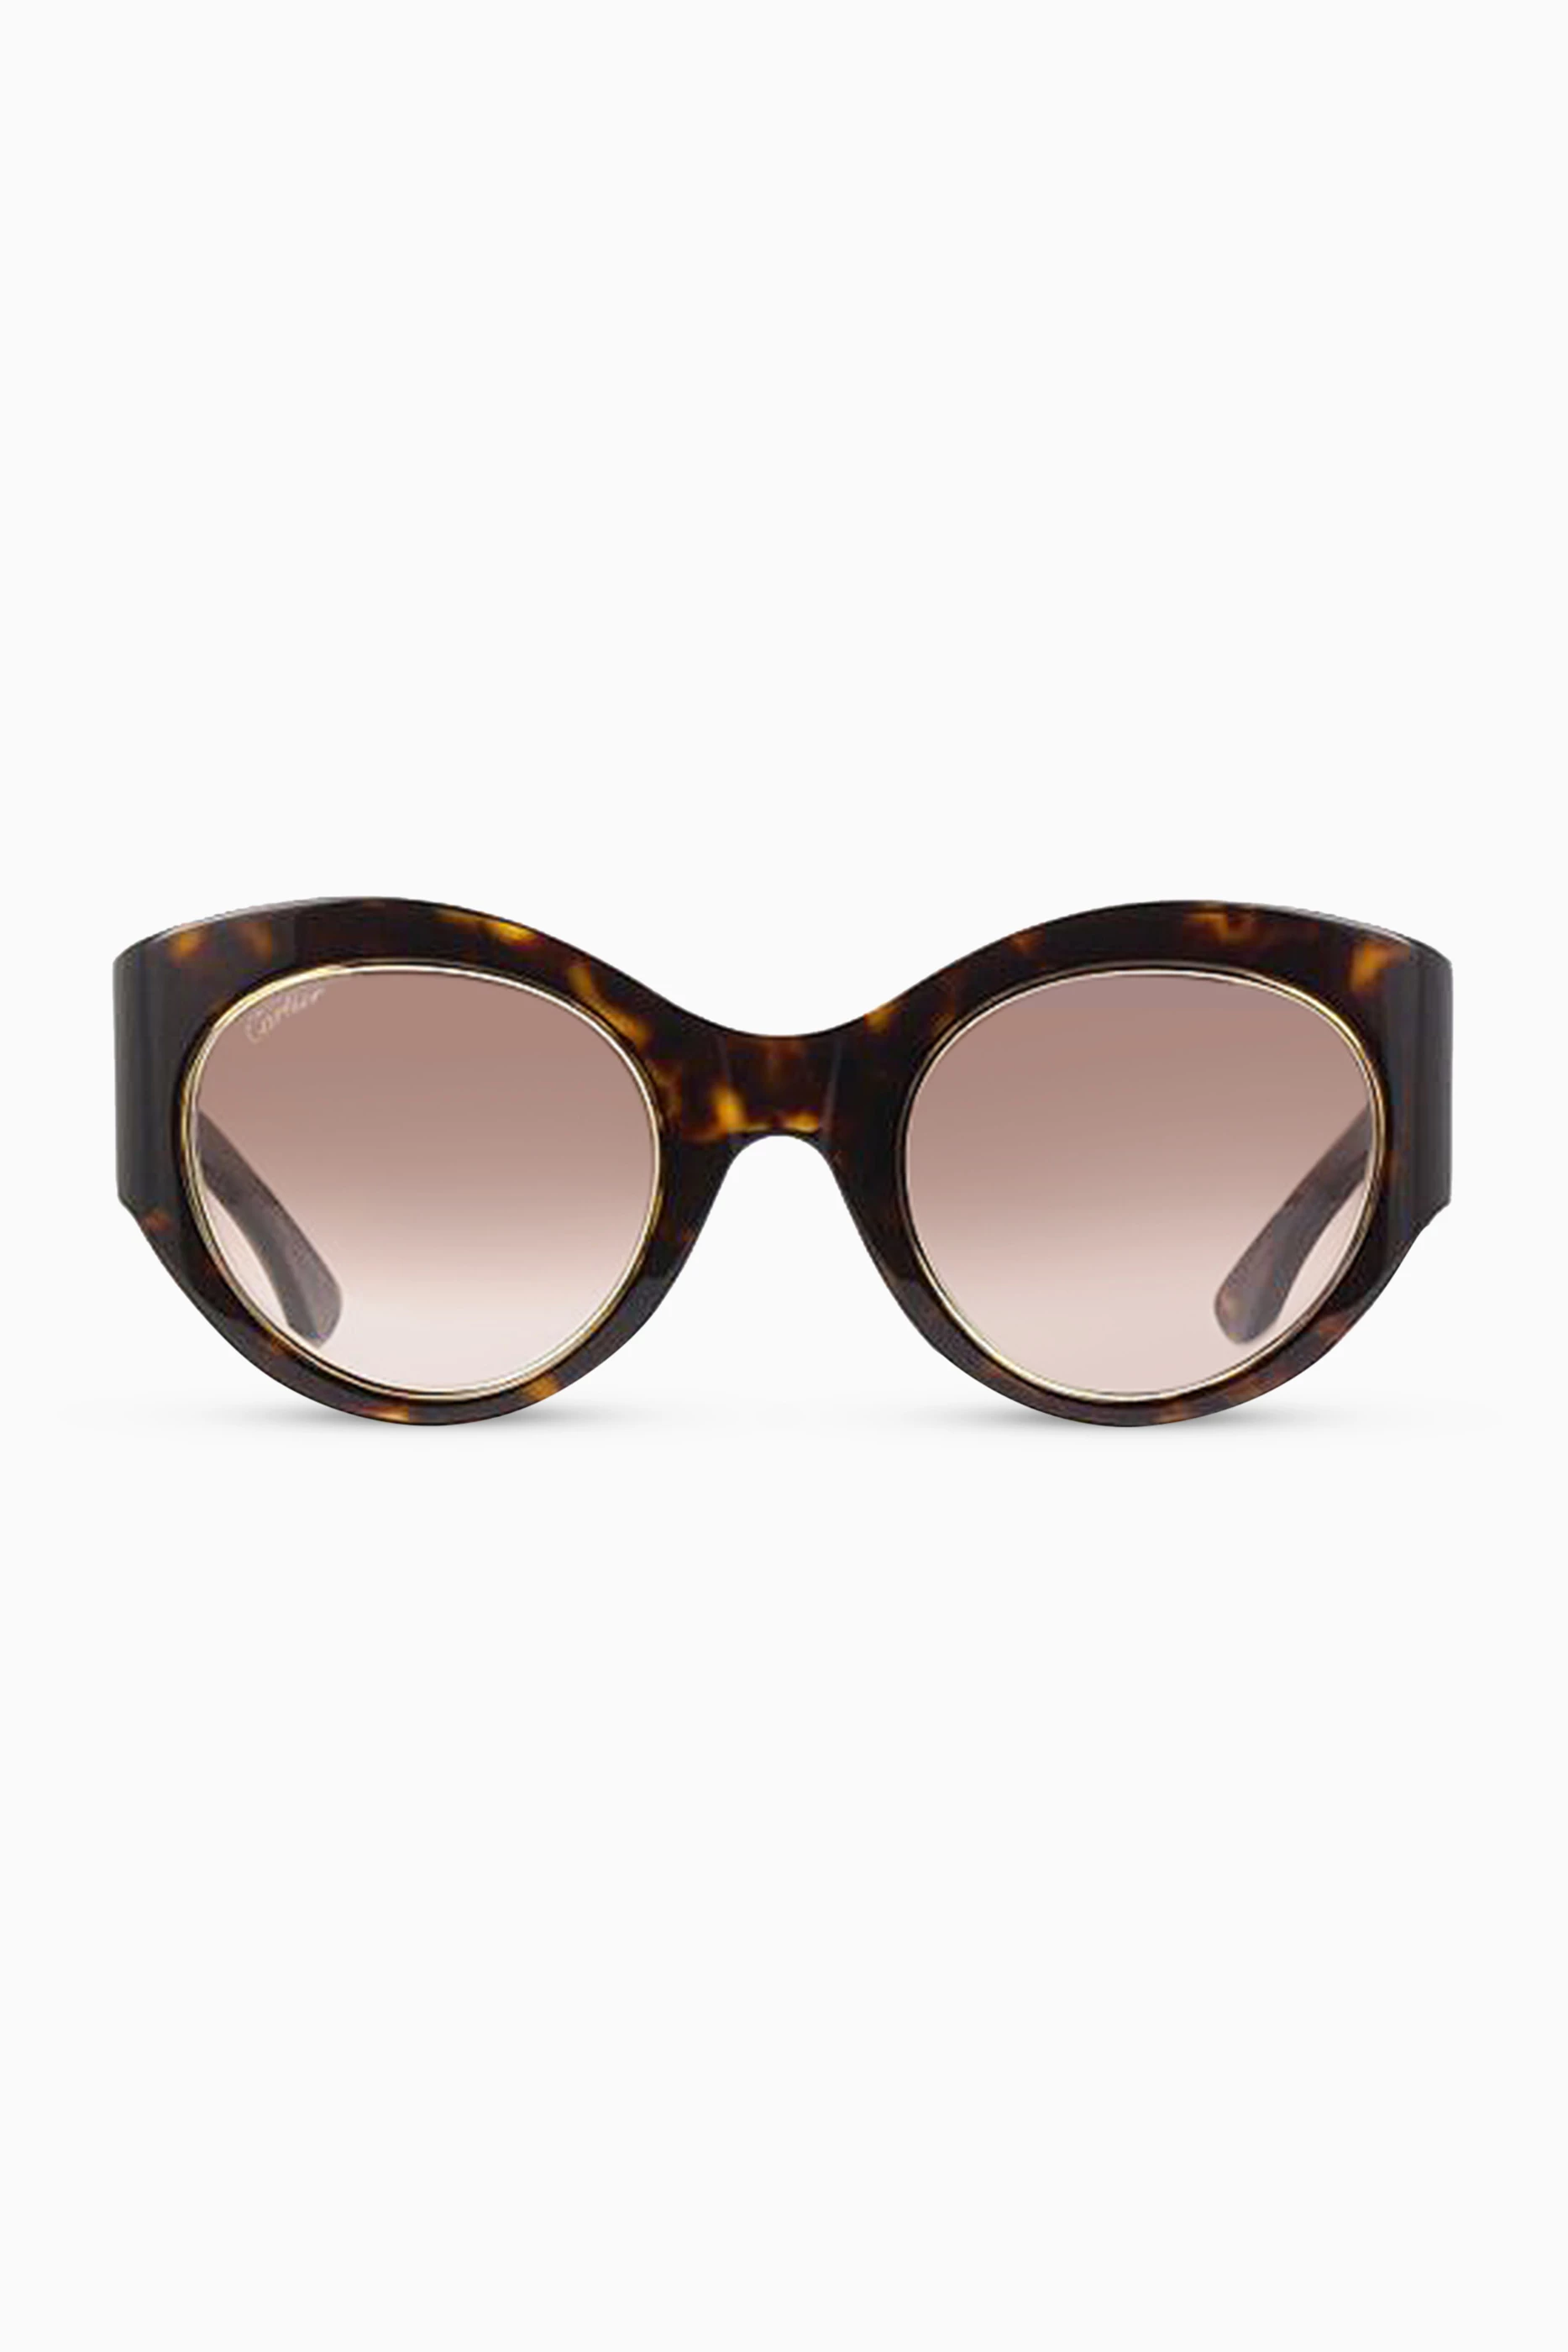 CHANEL Acetate Butterfly Sunglasses 5371 Tortoise 419380